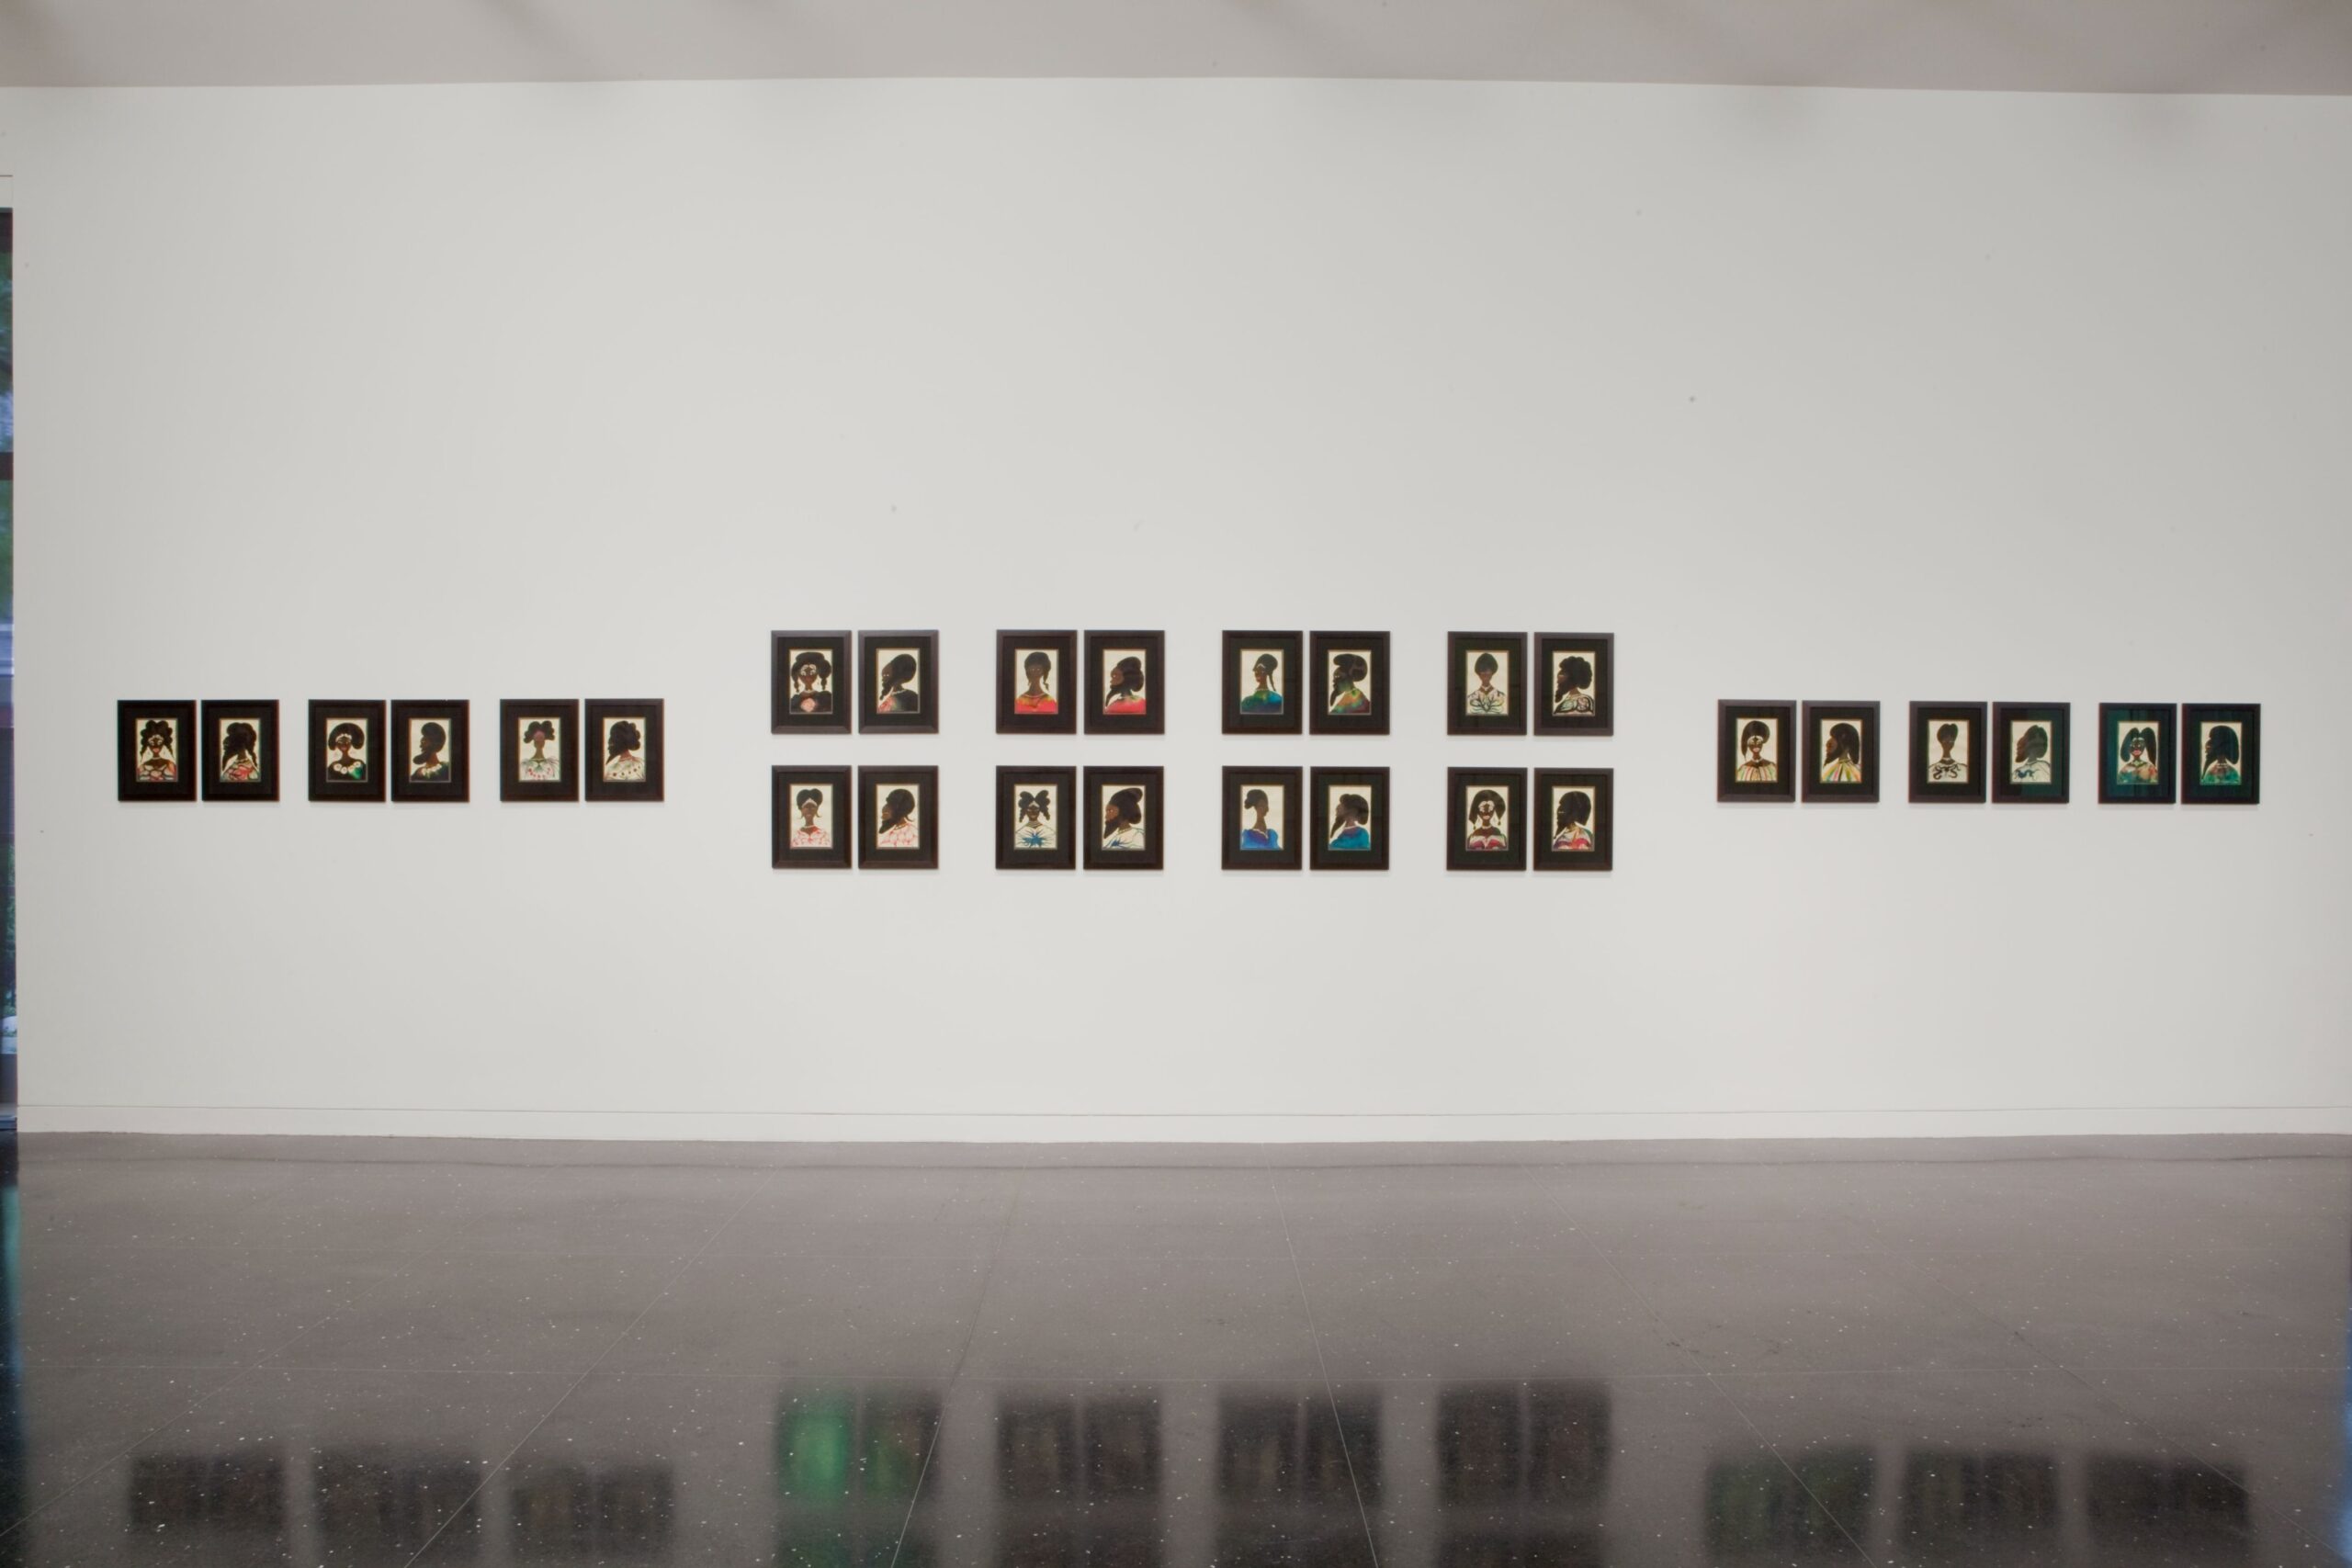 Two rows of six small watercolor portraits of Black subjects in black frames flank the left and right sides of four groups of similar portraits arranged in grids of four.